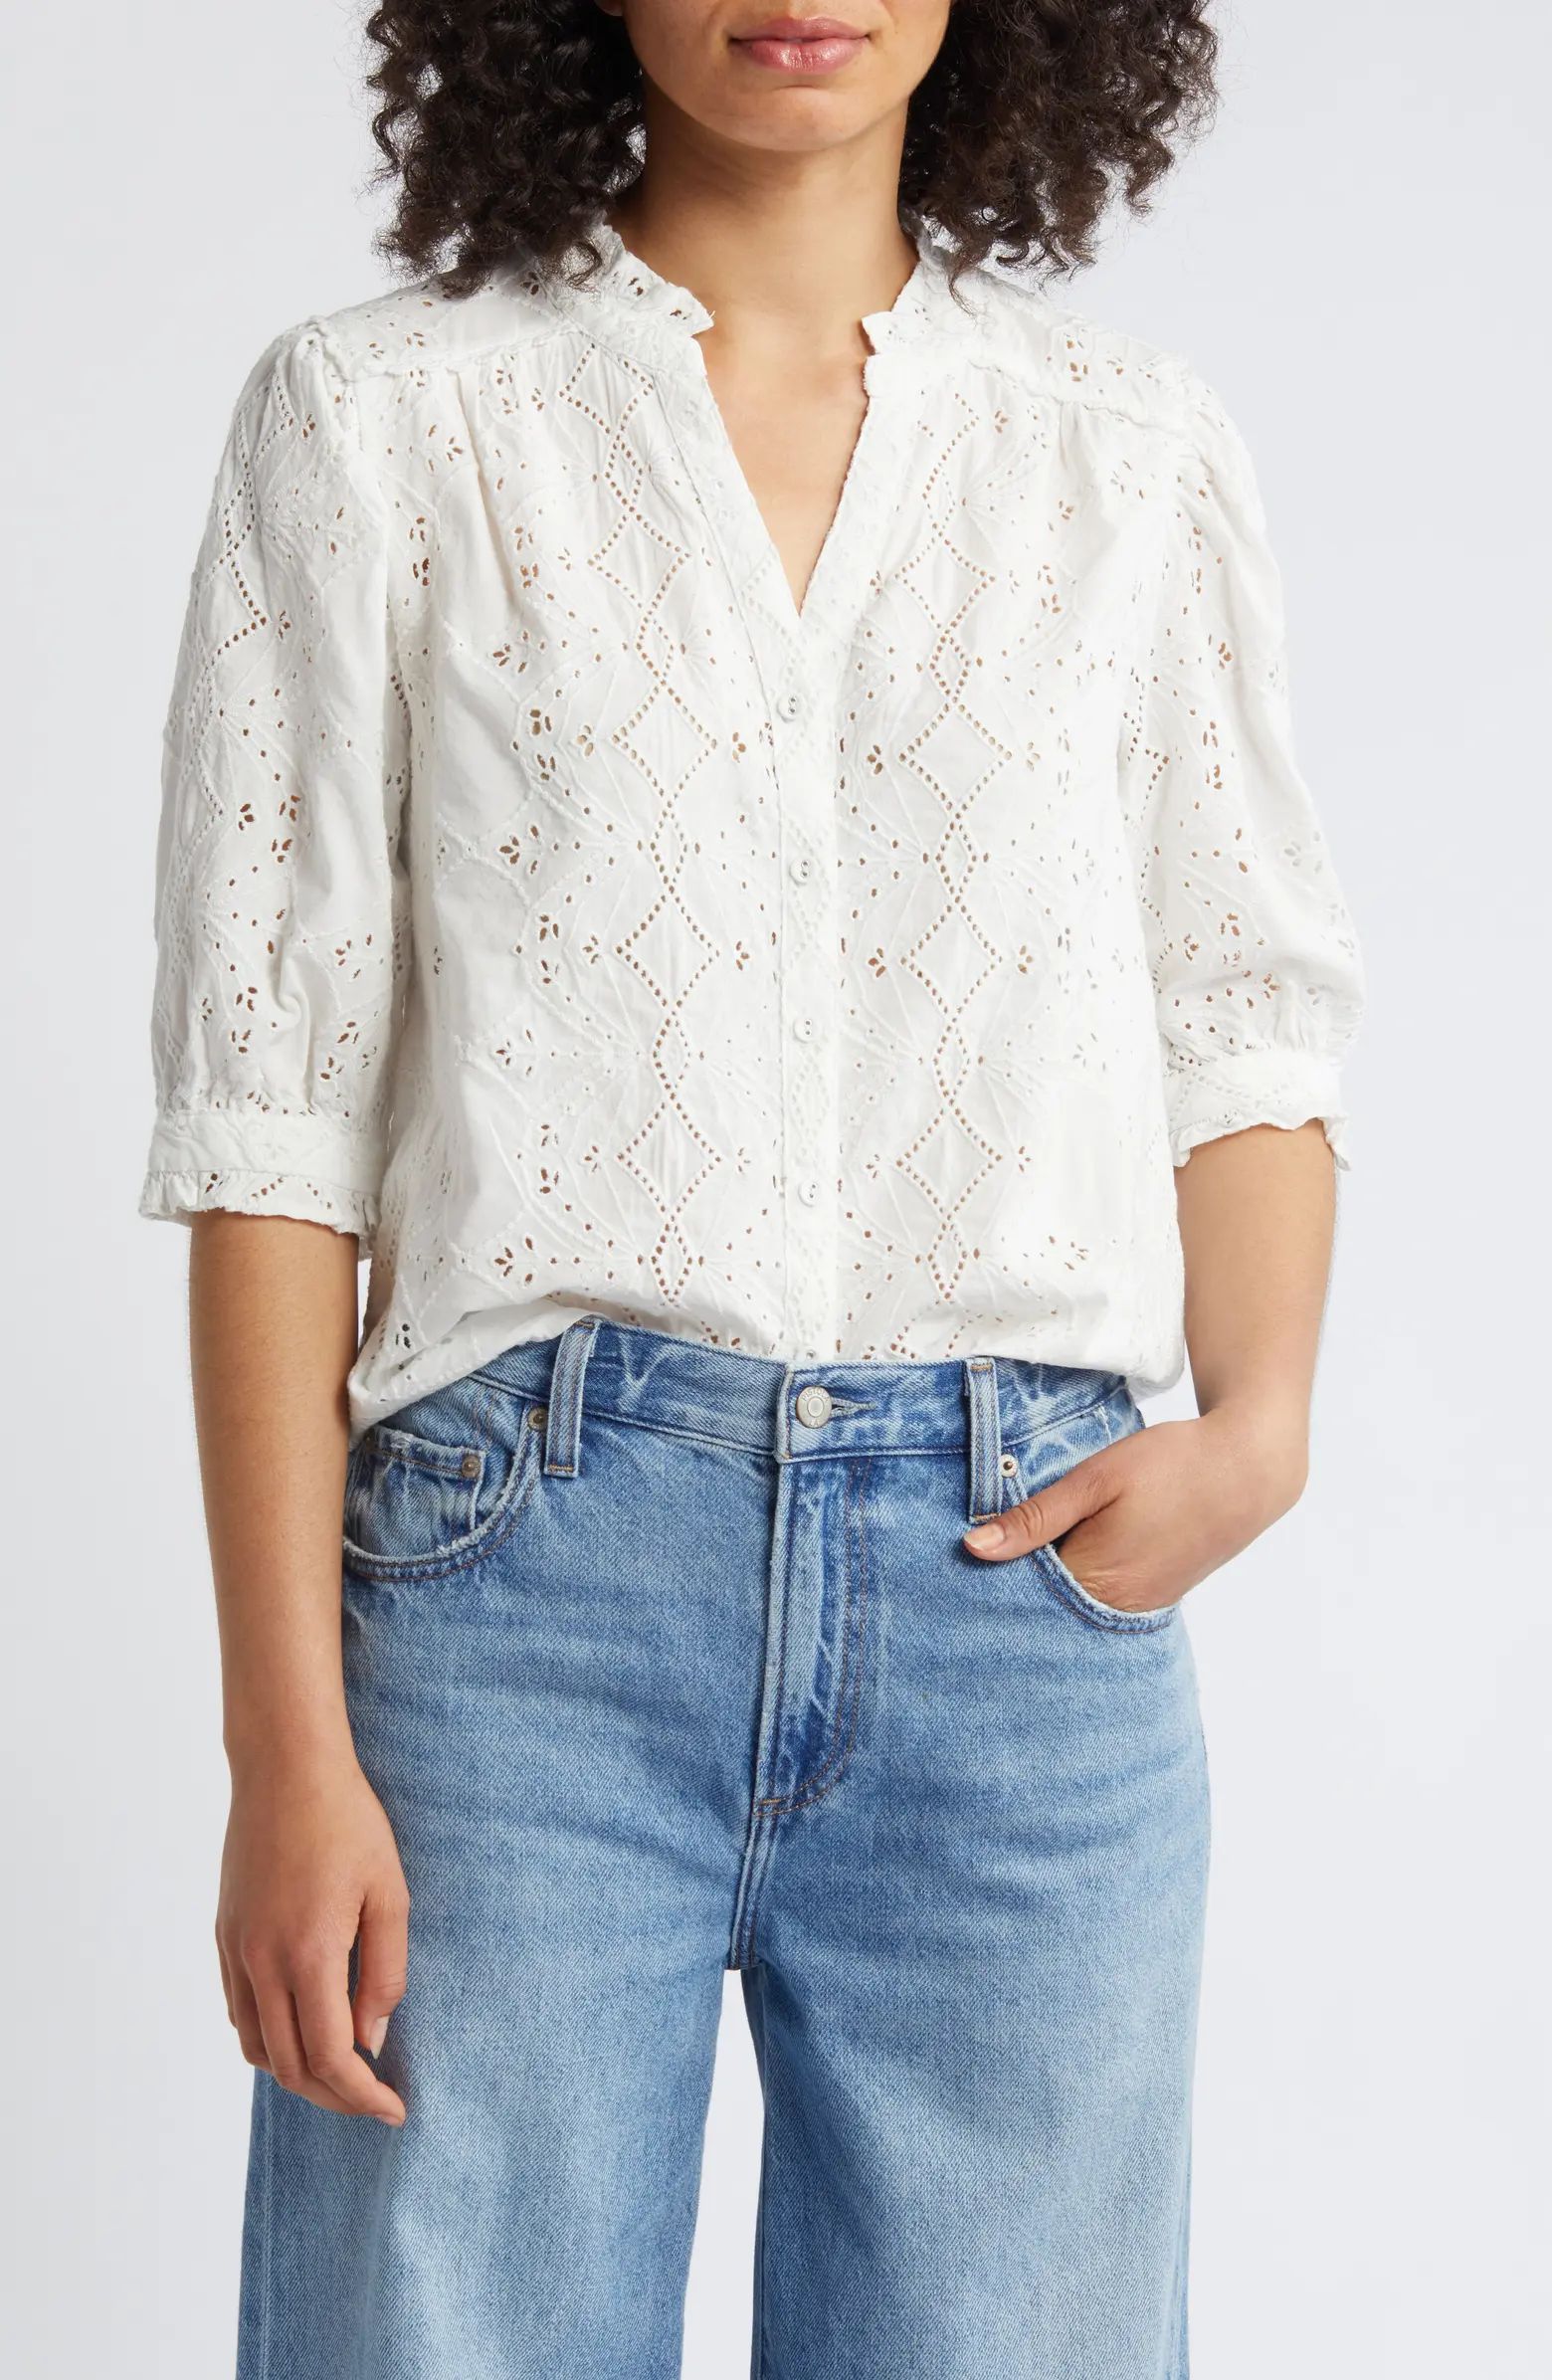 Wit & Wisdom Embroidered Eyelet Button-Up Shirt | Nordstrom | Nordstrom